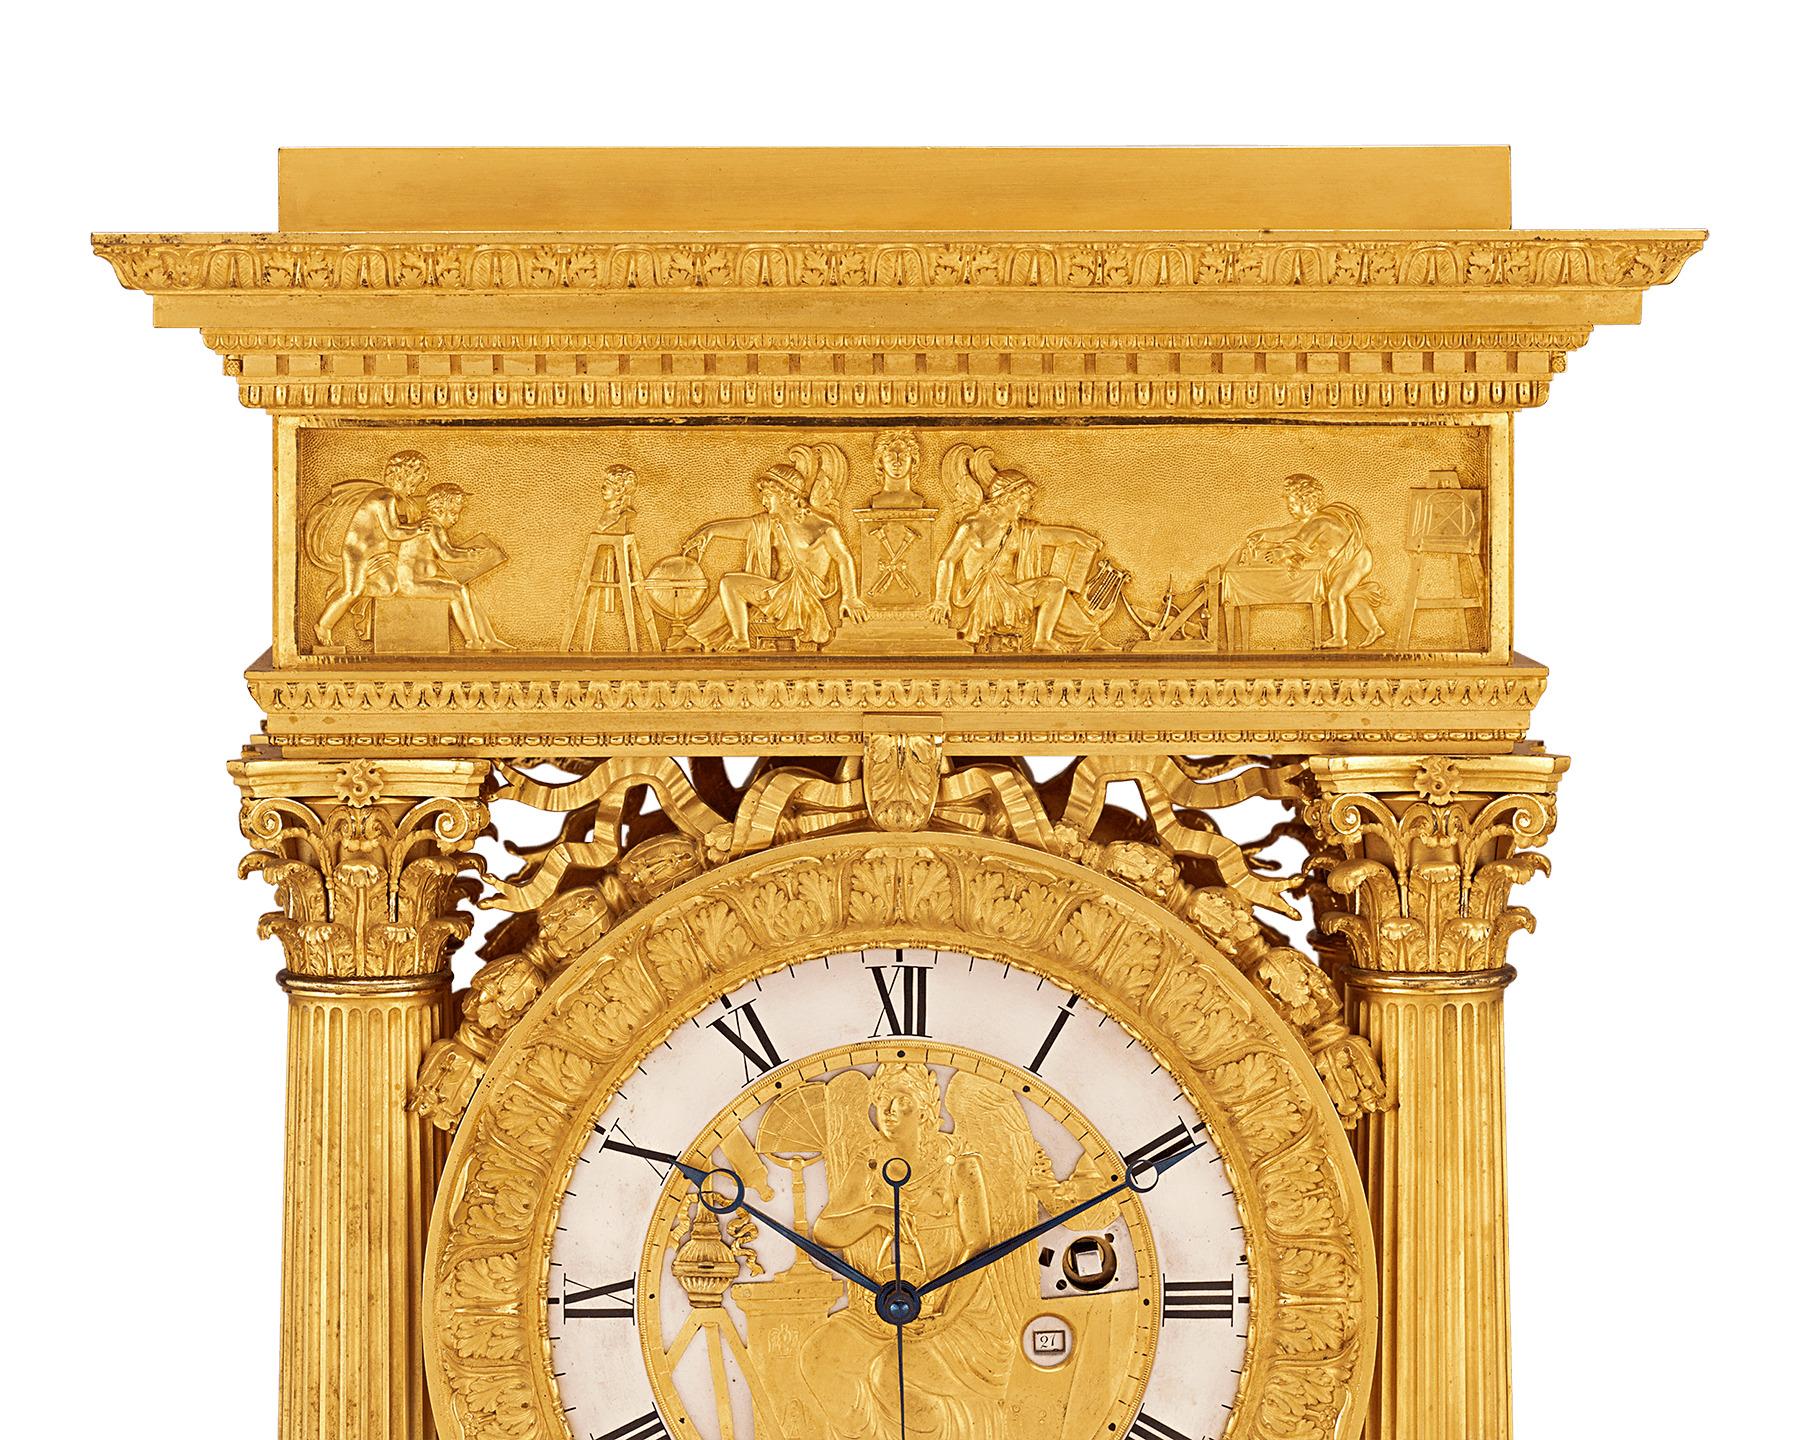 This quarter-striking, double sided French clock is among the most complex portico clocks ever created. Crafted by the clockmaker Michel-Francois Nicolas Piolaine of Paris, the exceptional timepiece is massive in size and masterfully constructed